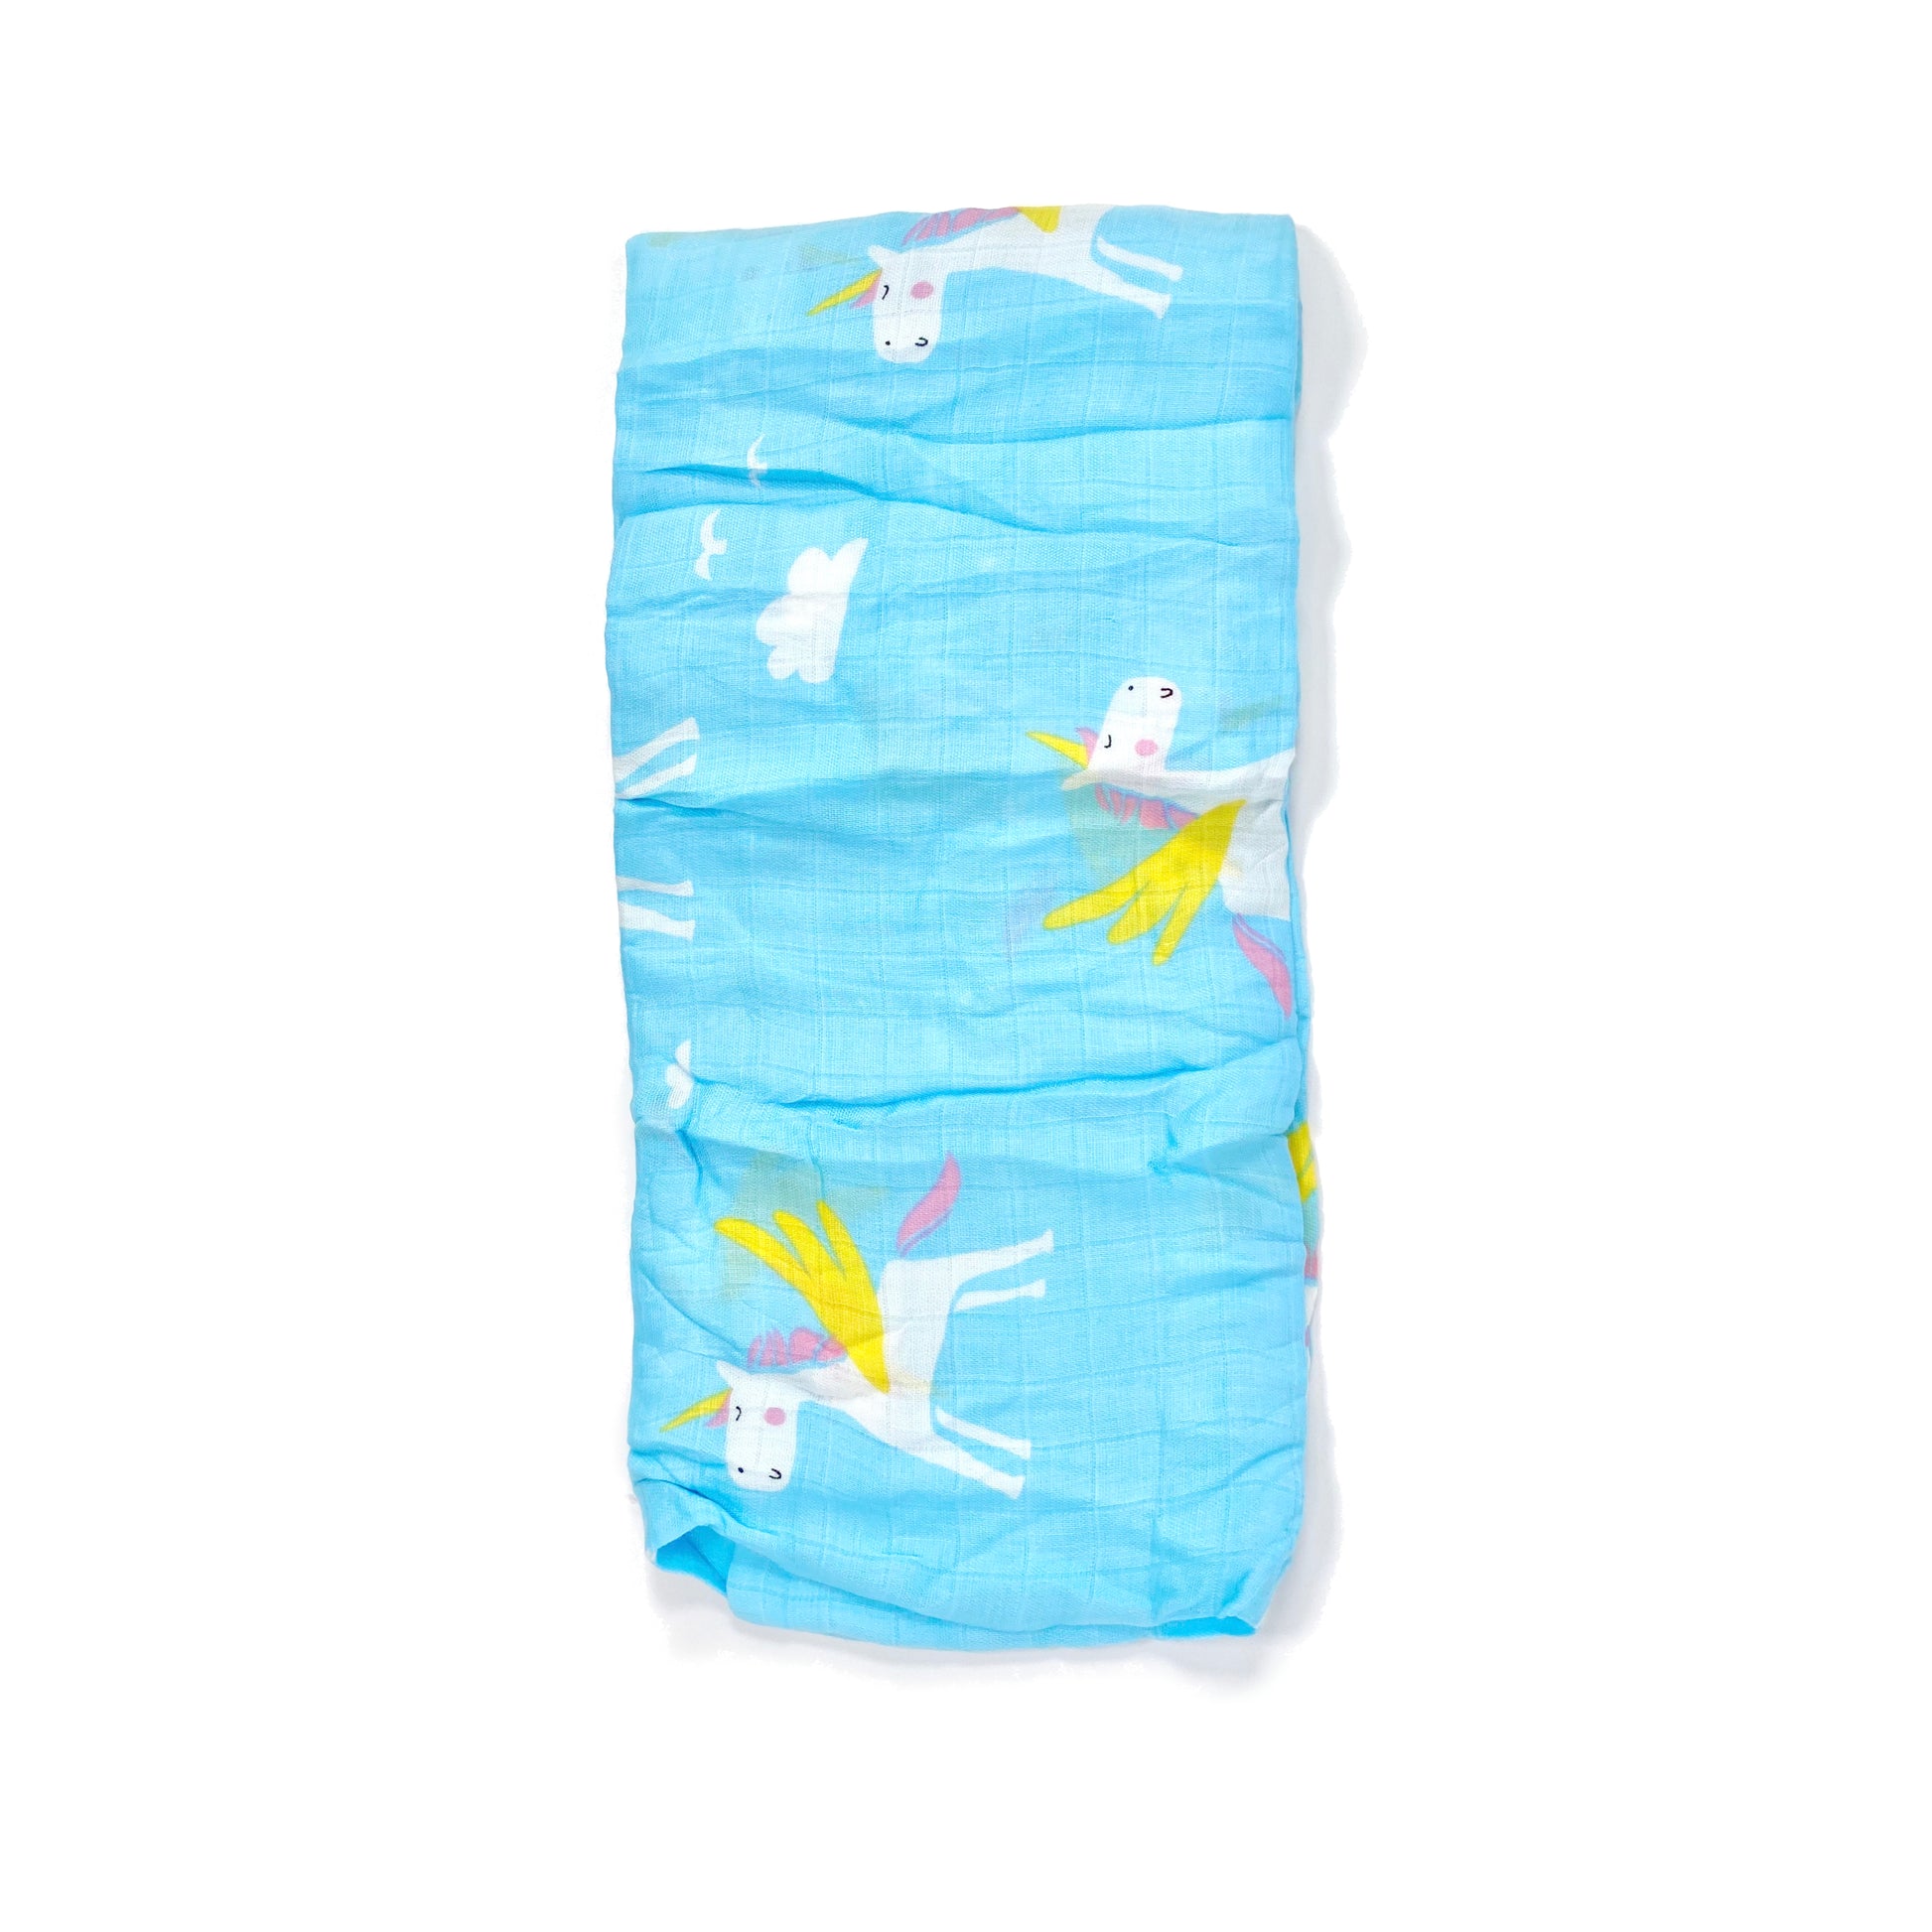 A folded blue muslin swaddle blanket with a unicorn design.